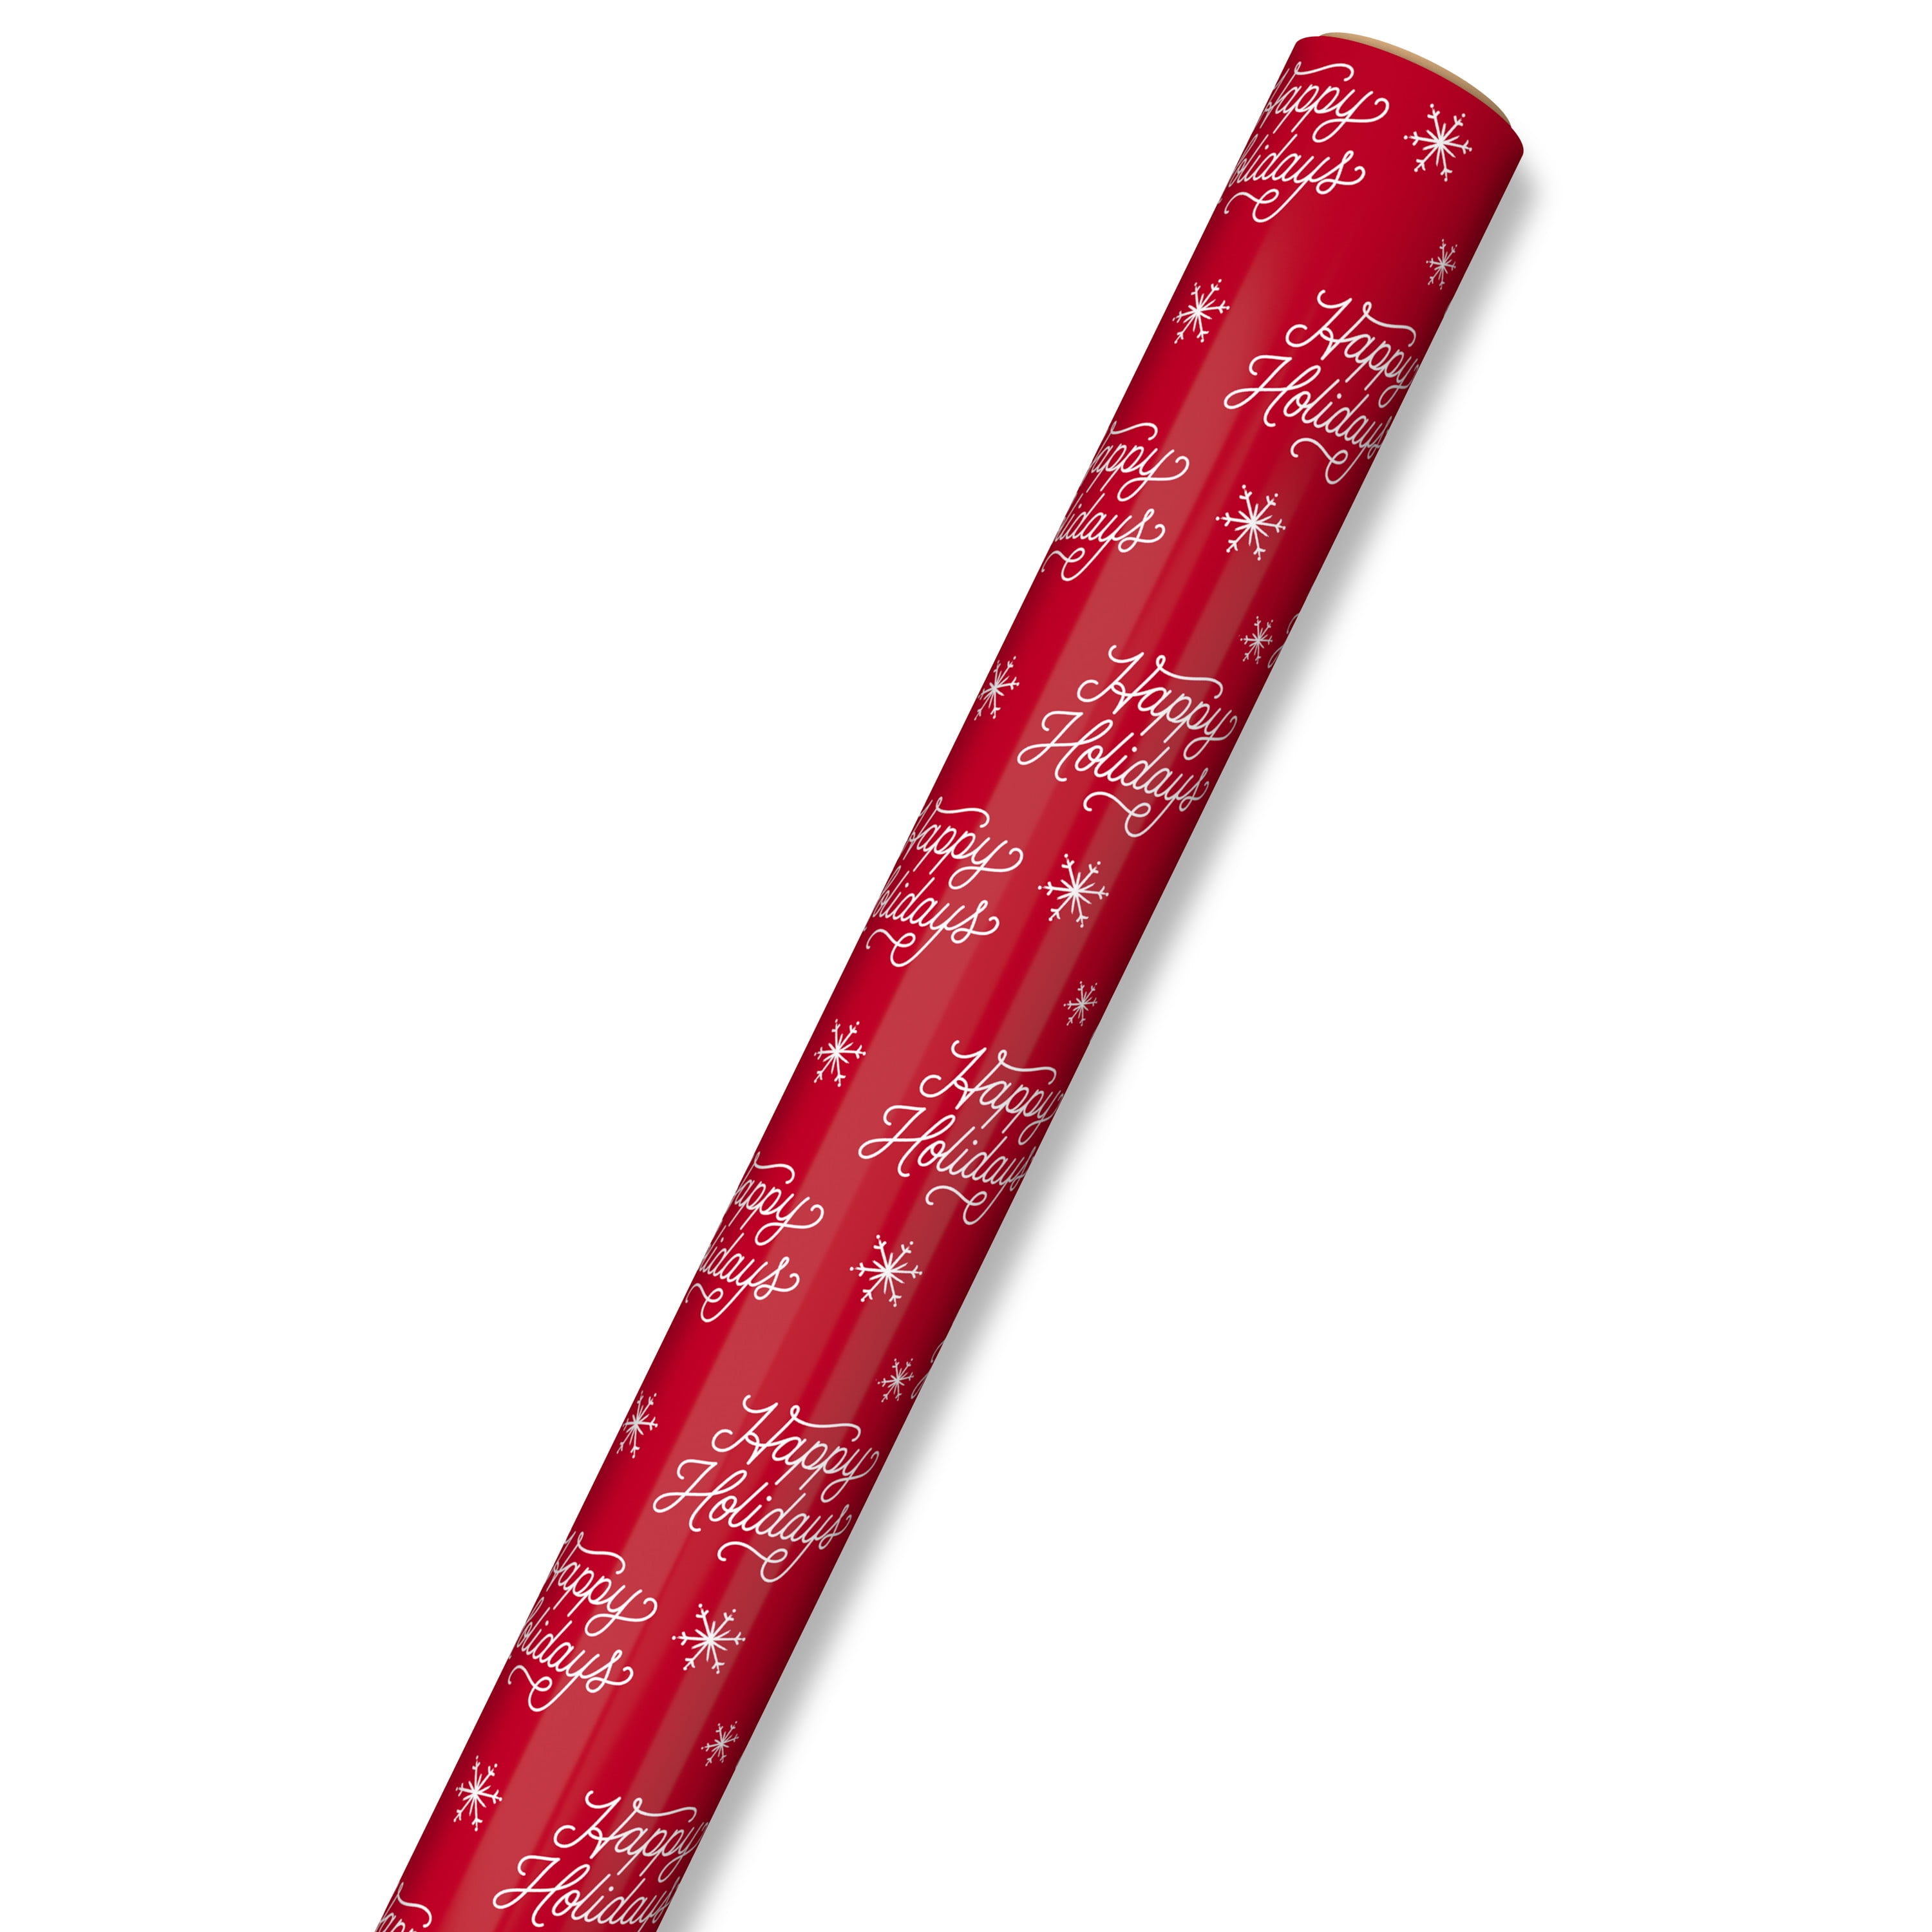 Hallmark Holiday Wrapping Paper (Snowflakes on Red)